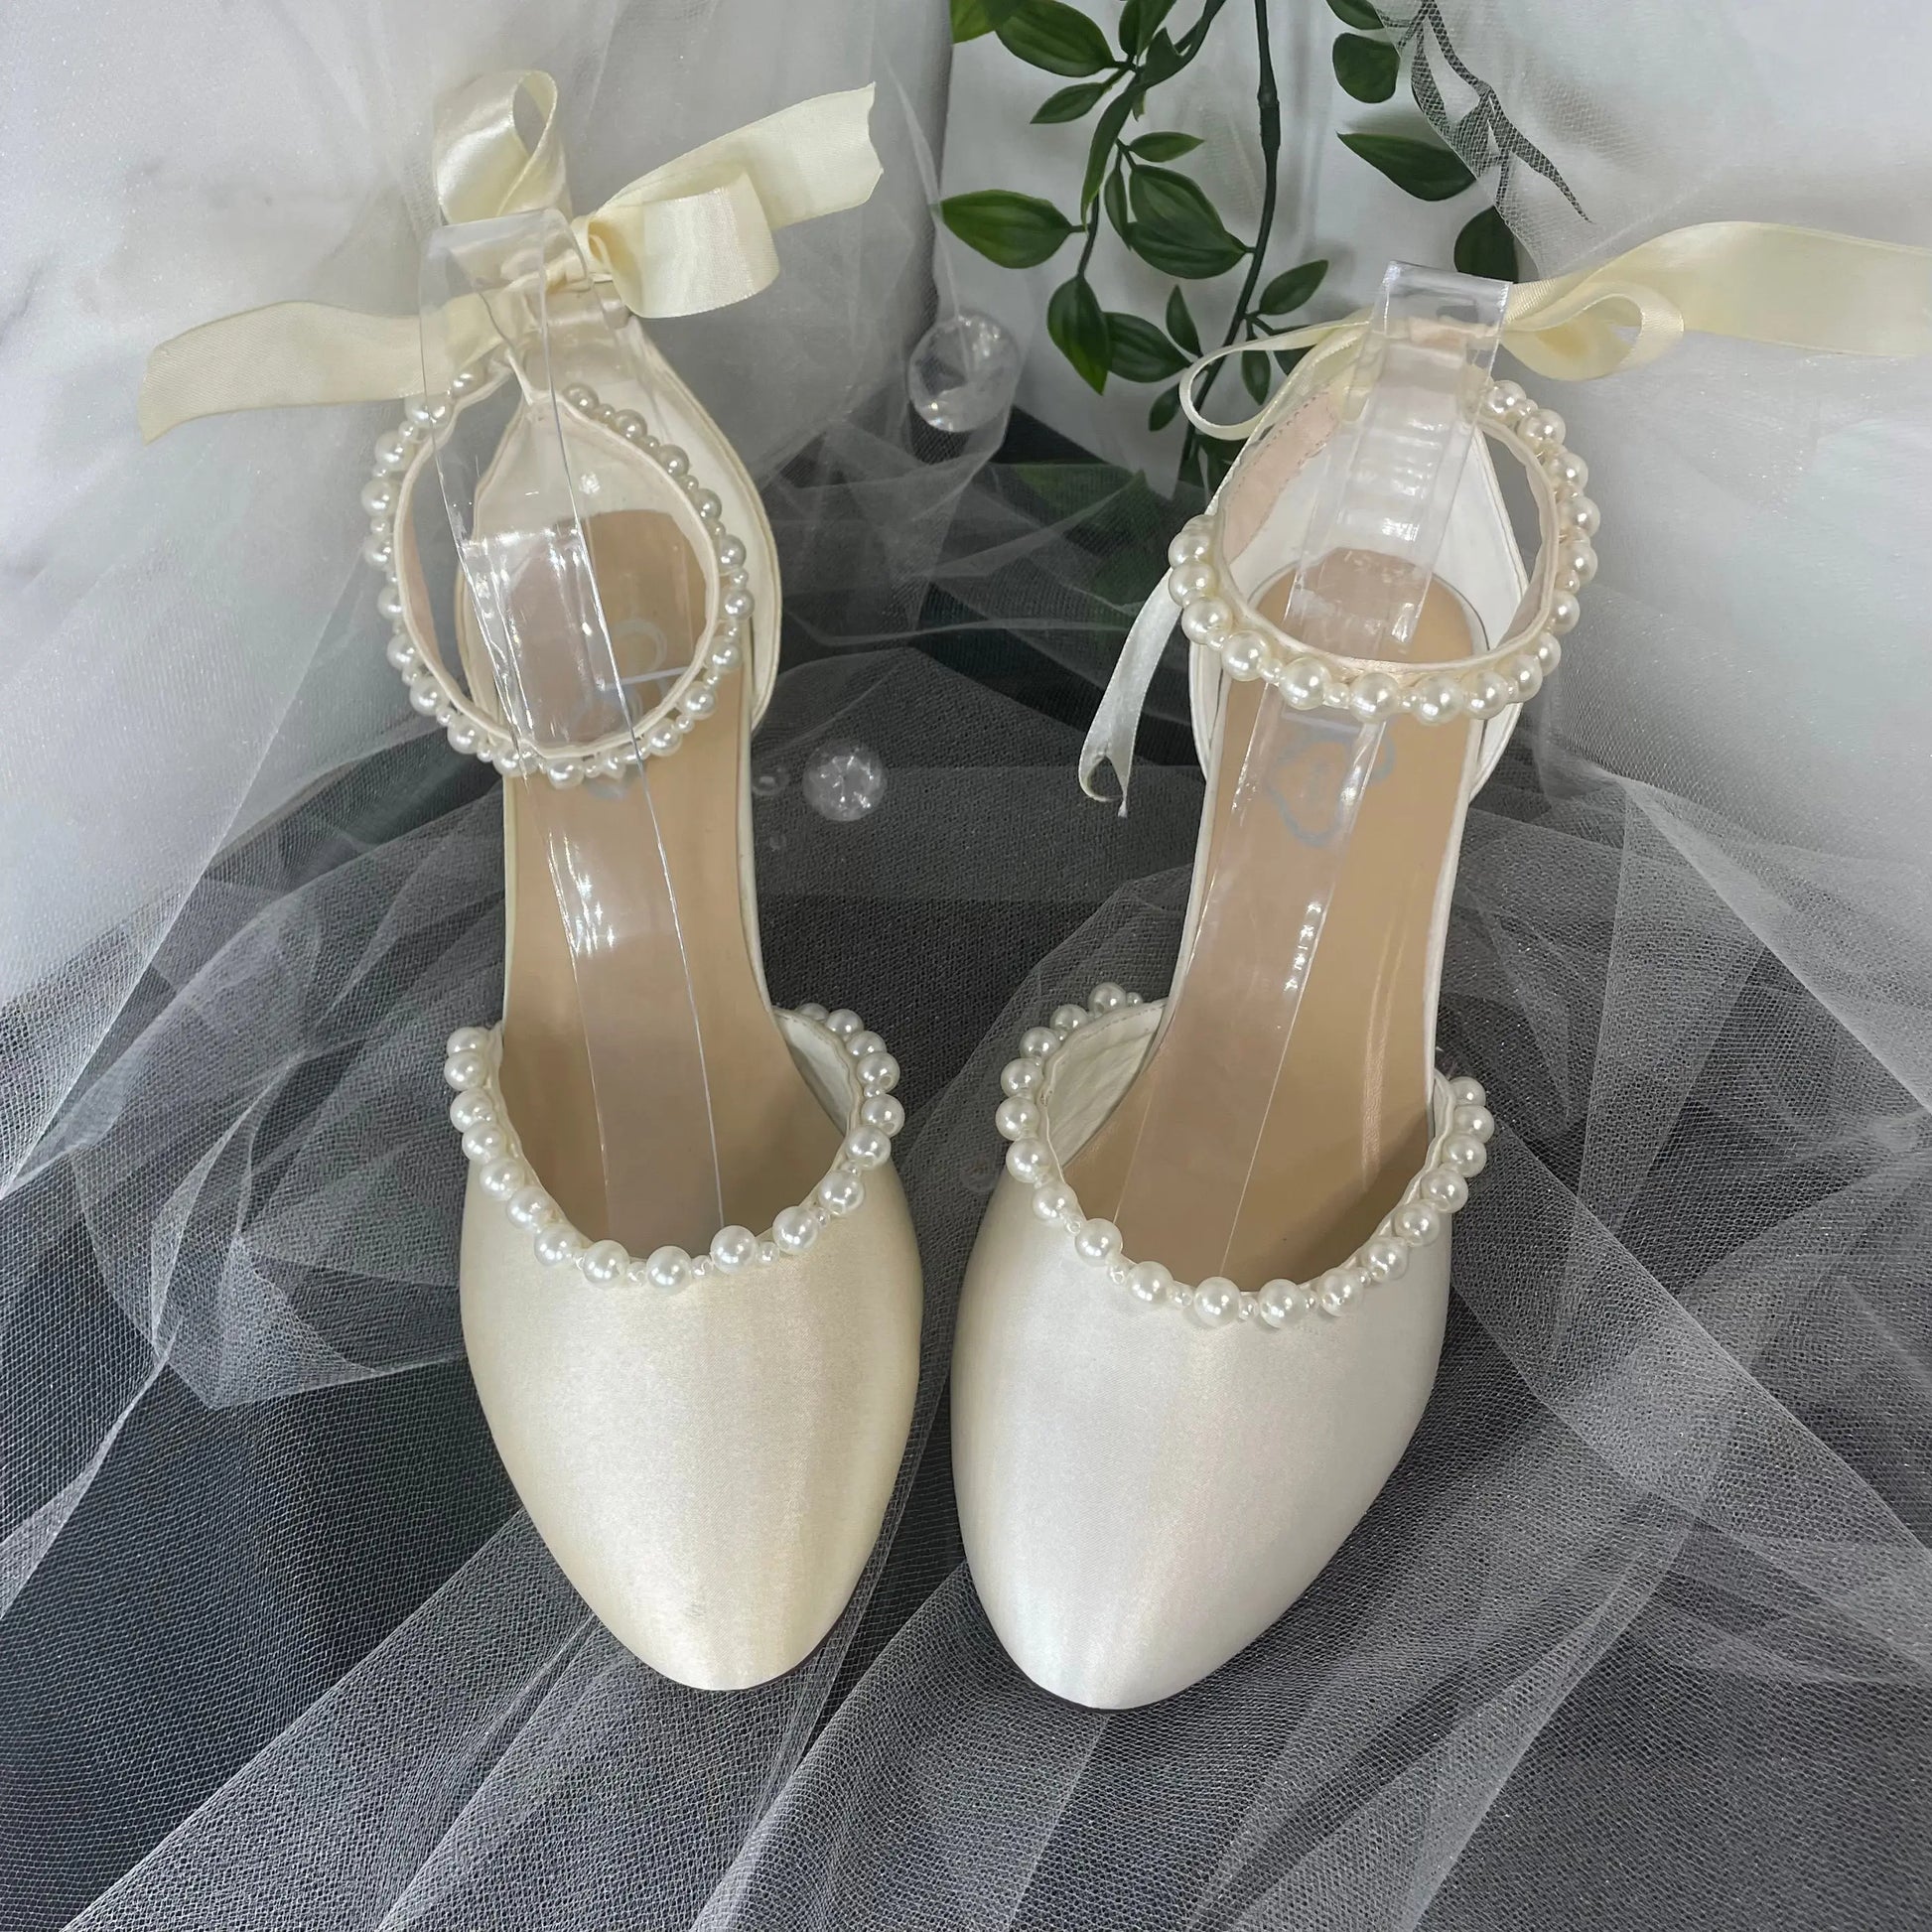 Dixie Bridal Shoe Front View Different Color: Front view of the Dixie Bridal Shoe highlighting the color difference due to display stock.